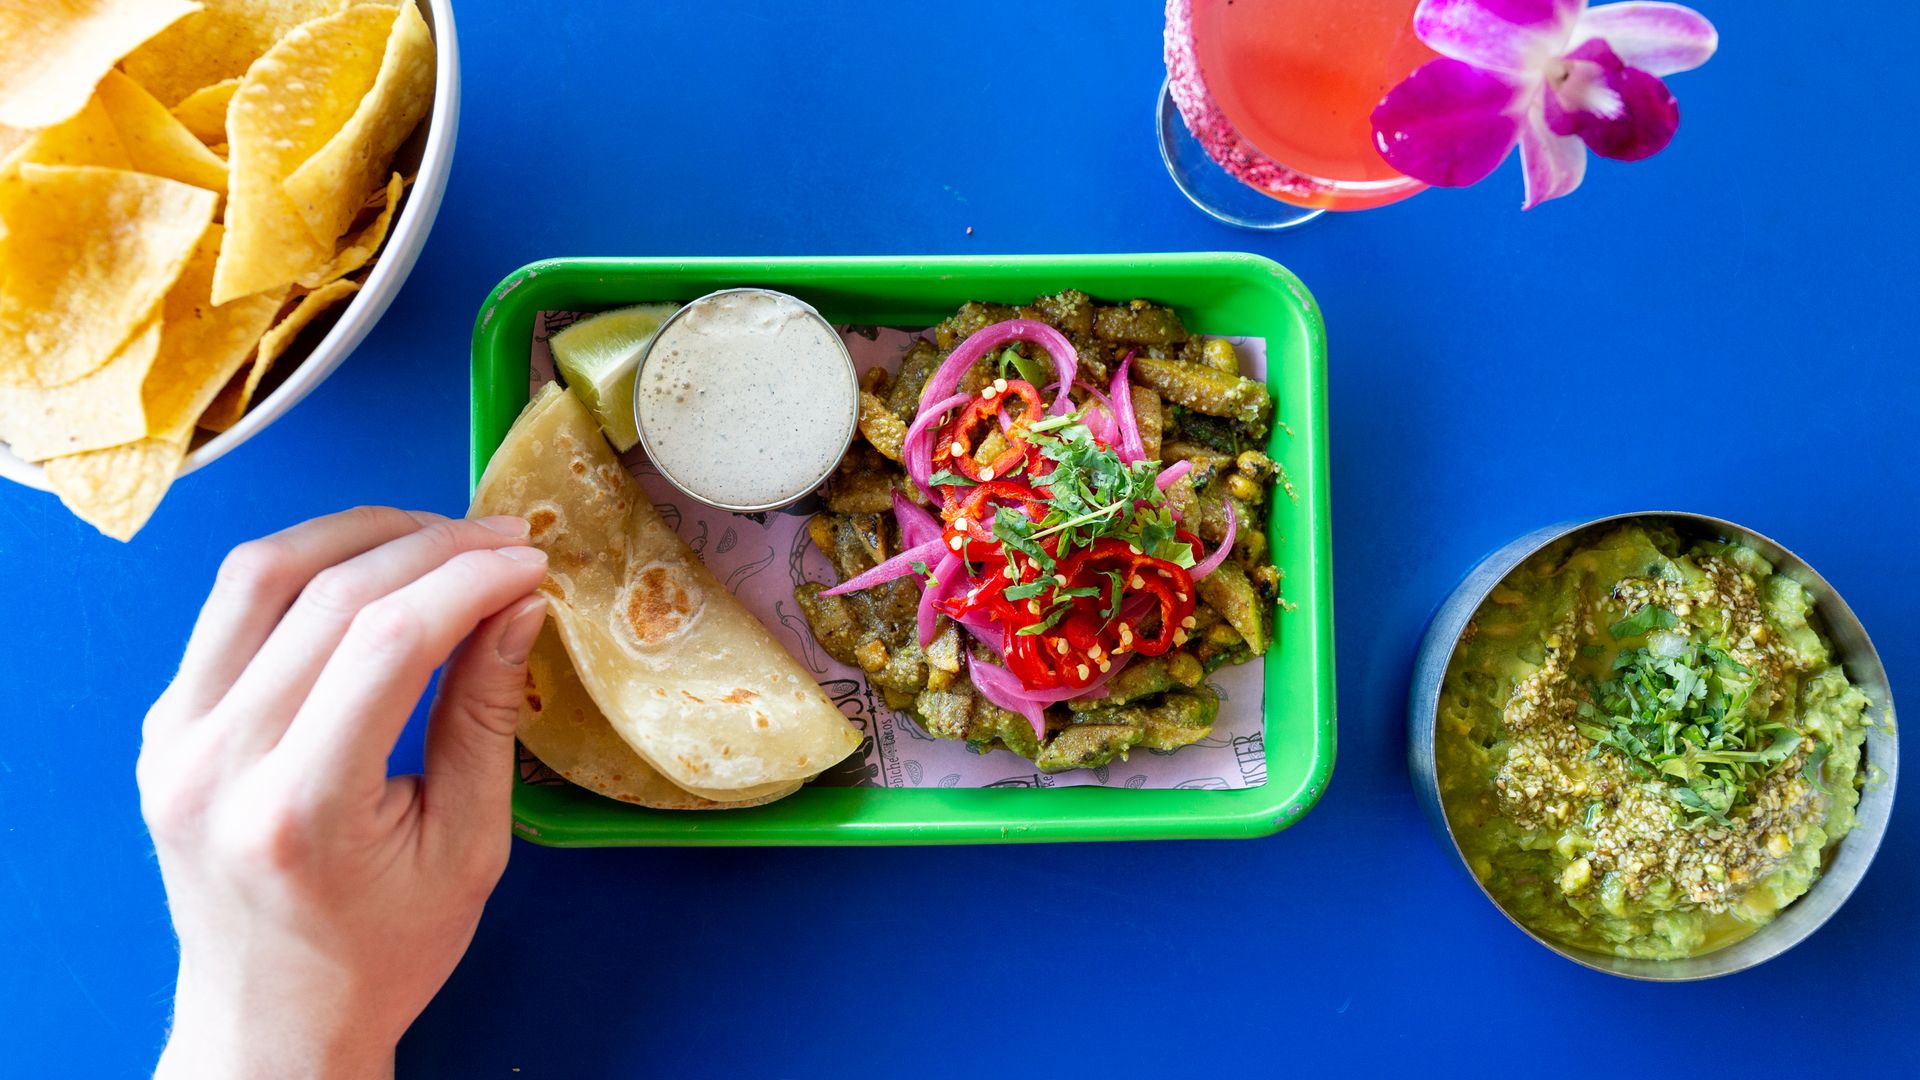 A hand reaches for a flour tortilla and taco fillings on a rectangular green plate. The blue table is also set with tortilla chips, guacamole and a pink cocktail.